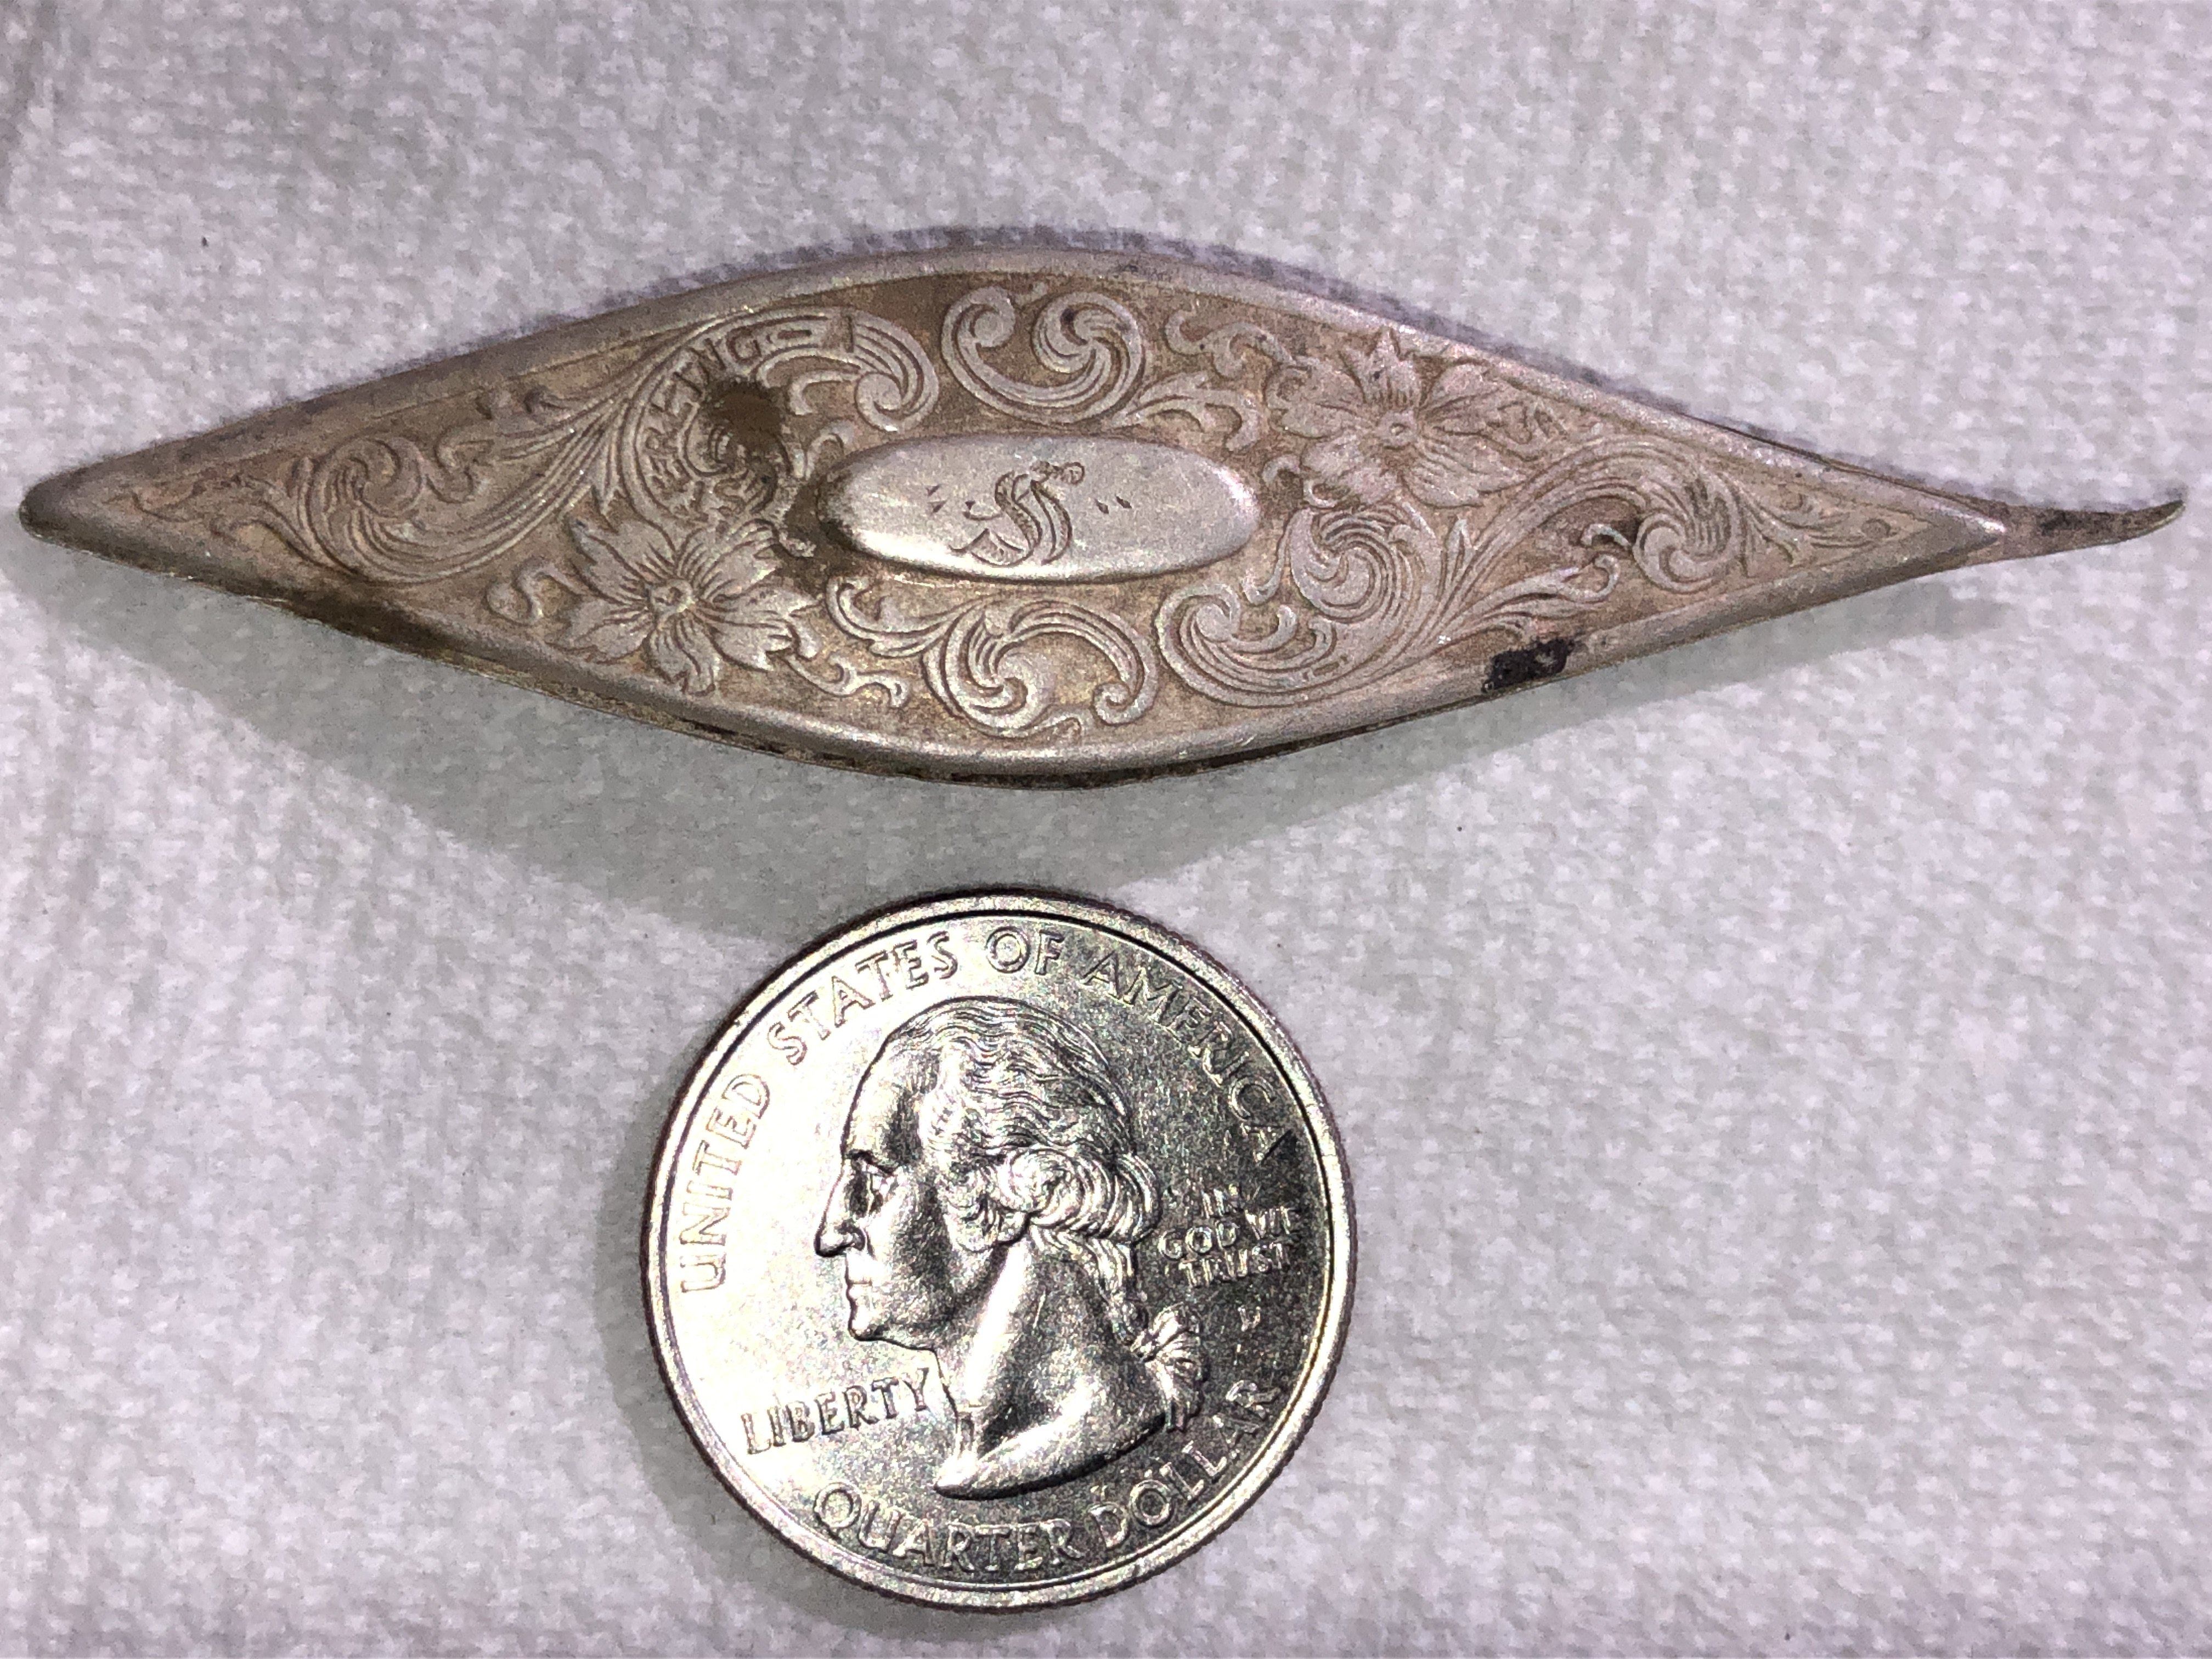 Mysterious Sterling Silver Metal Detecting Find Identified!